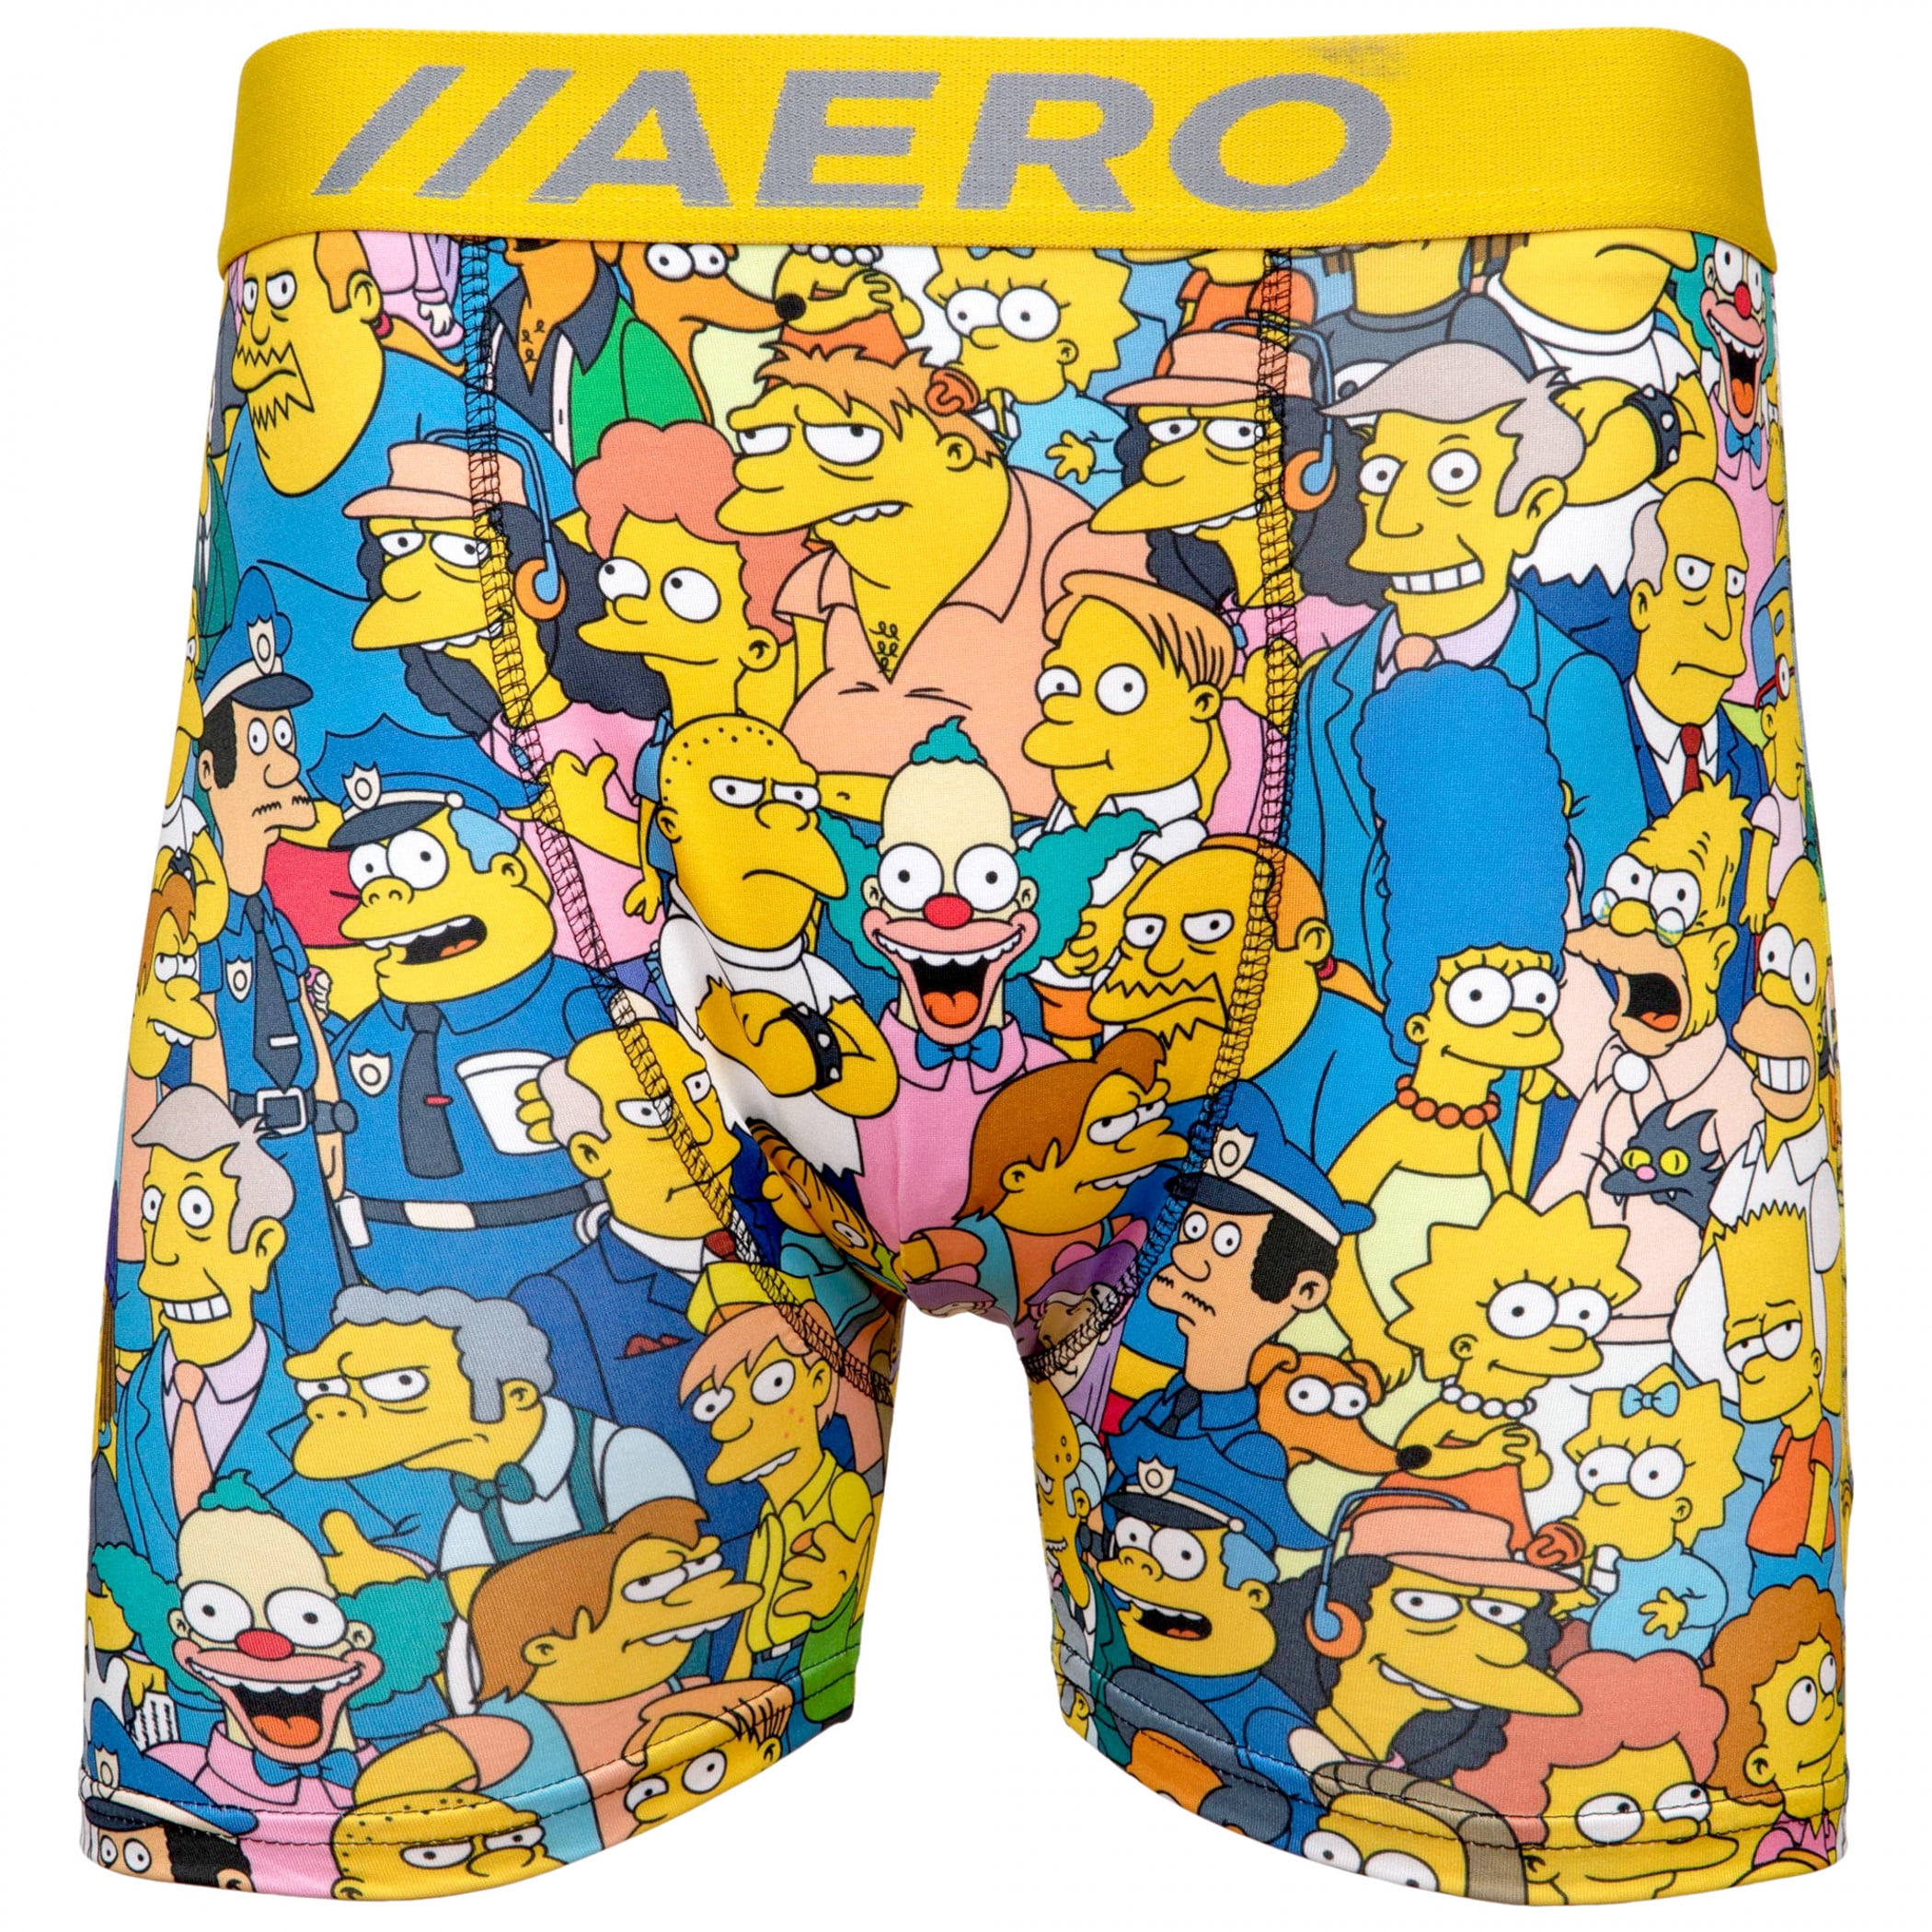 Aeropostale Limited Edition The Simpsons Performance Men's Boxer Briefs 